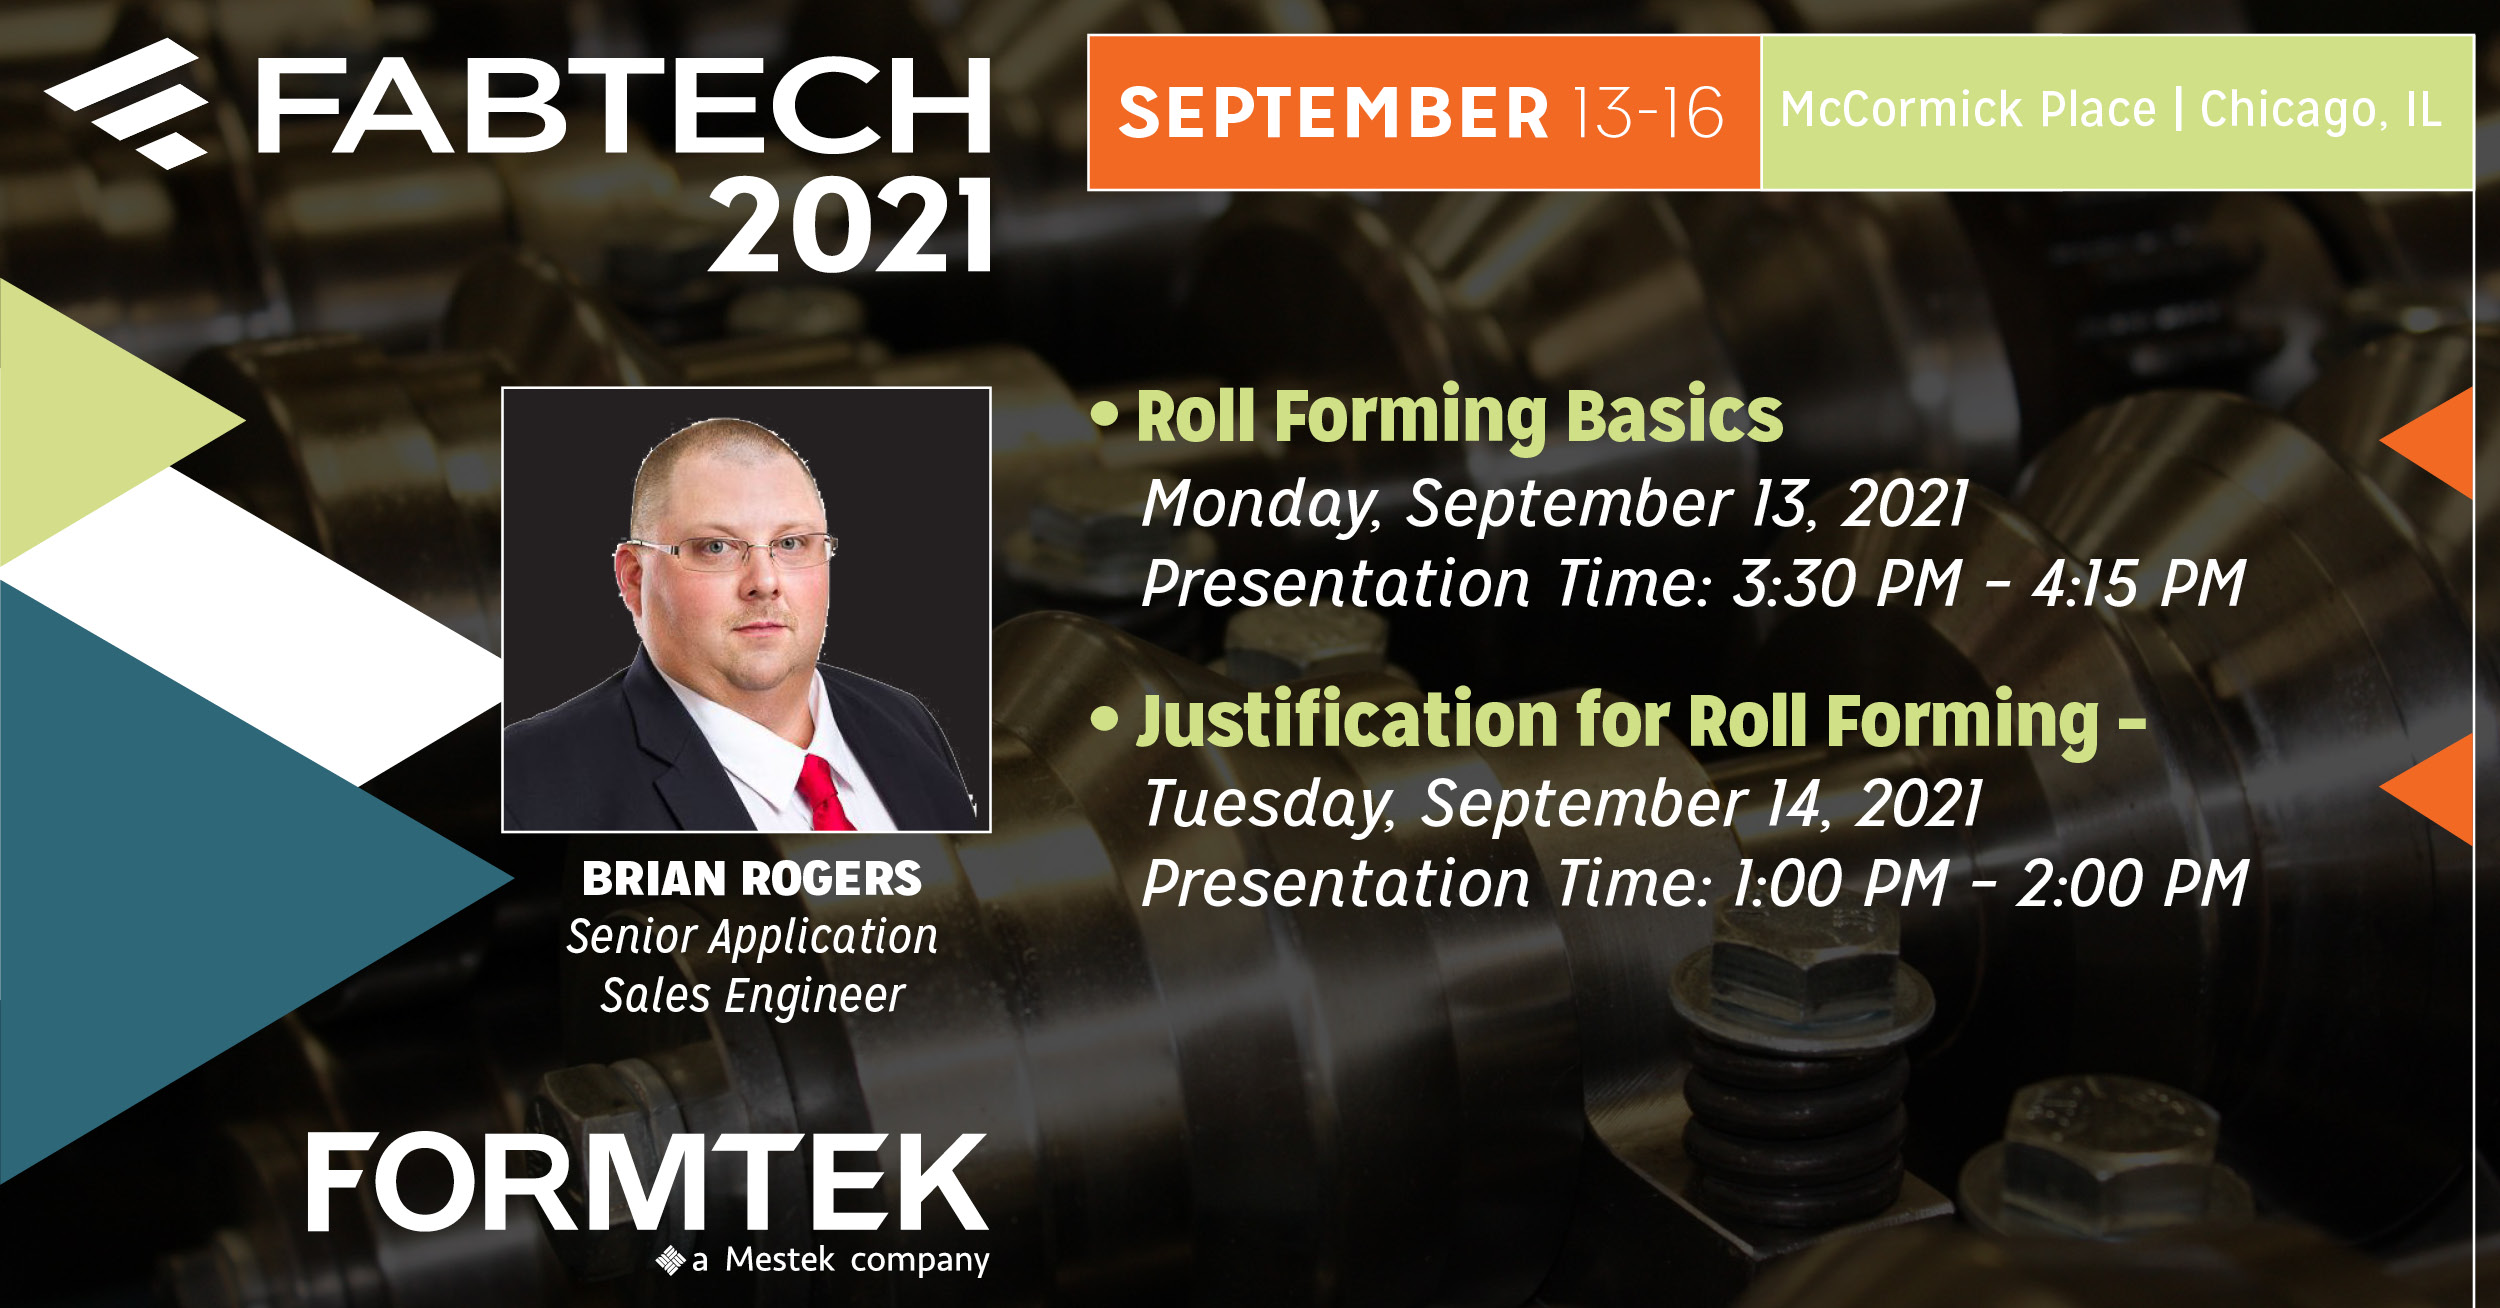 Brian Rodgers to Speak at FABTECH 2021